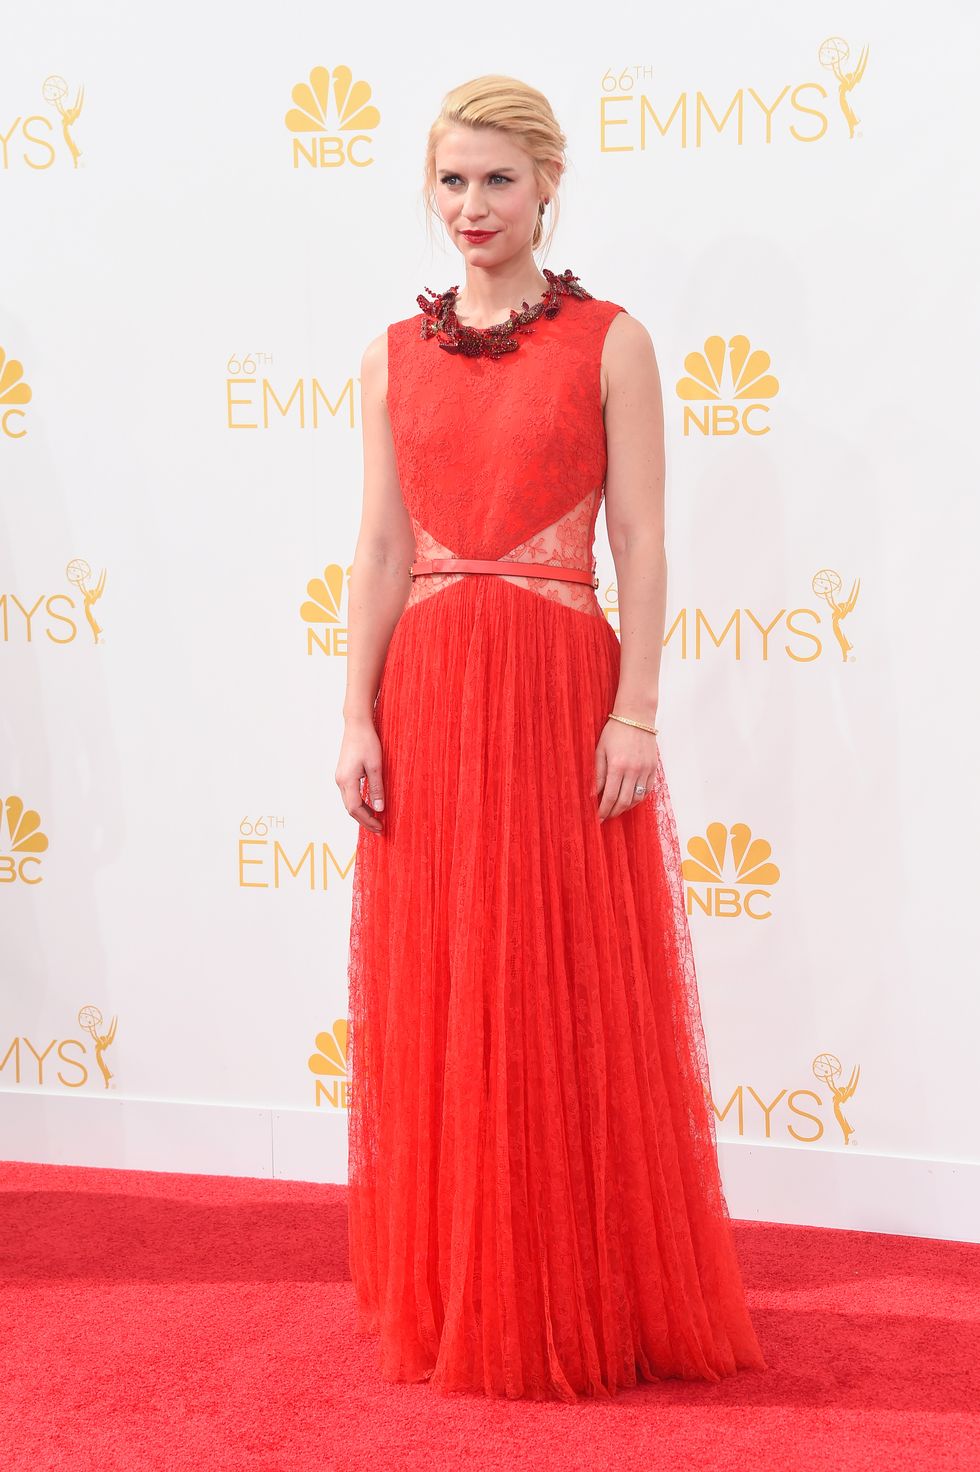 Claire Danes is beautiful in red Givenchy gown at the 2014 Emmy Awards